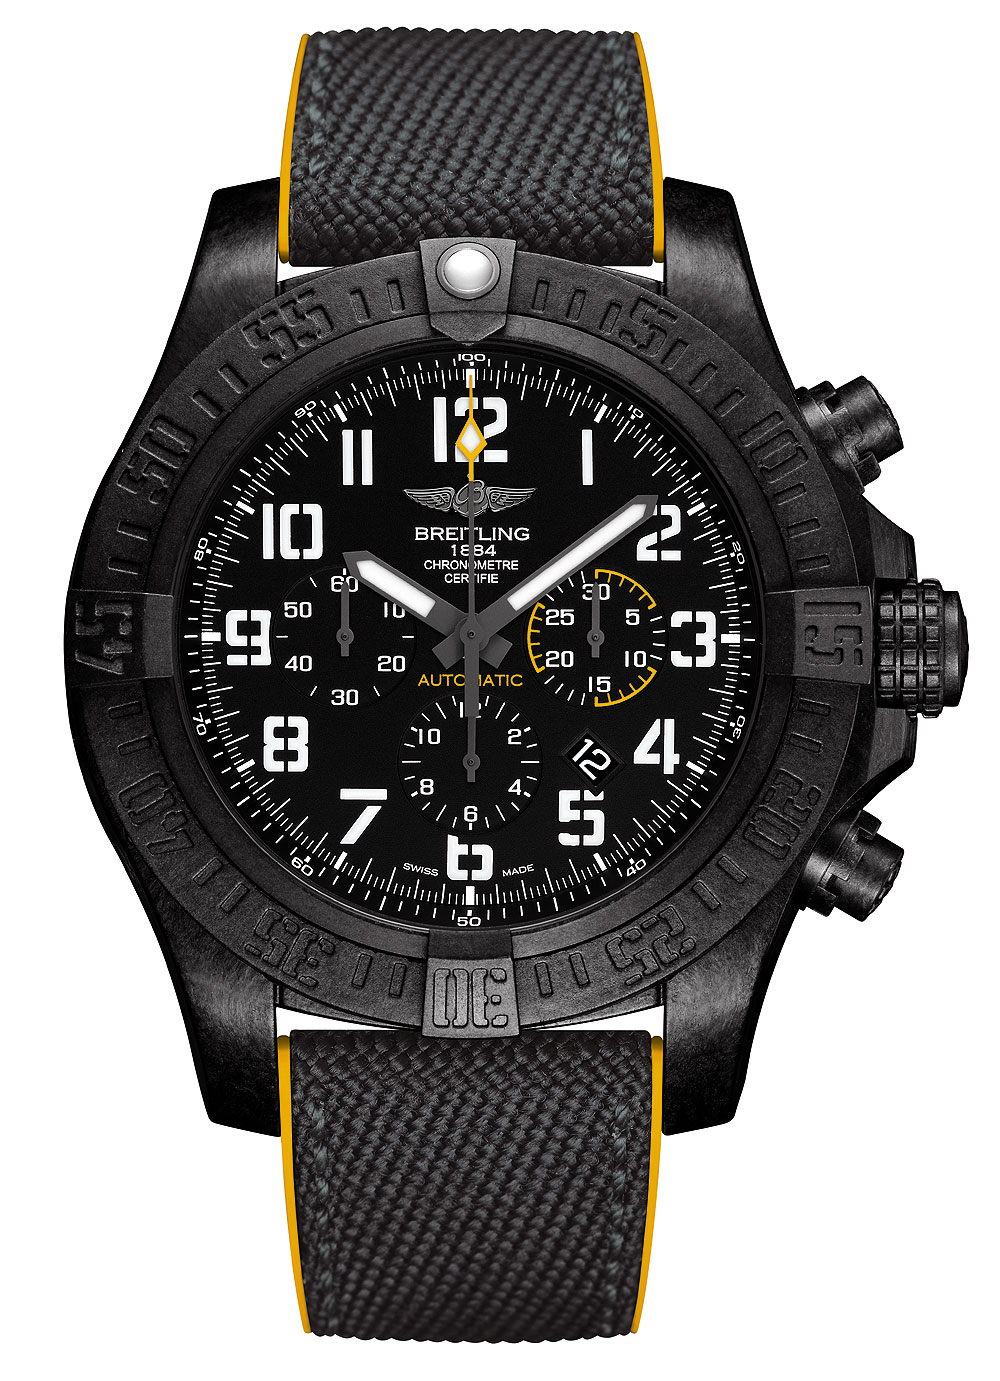 Breitling Avenger Hurricane Available With 12-Hour Dial